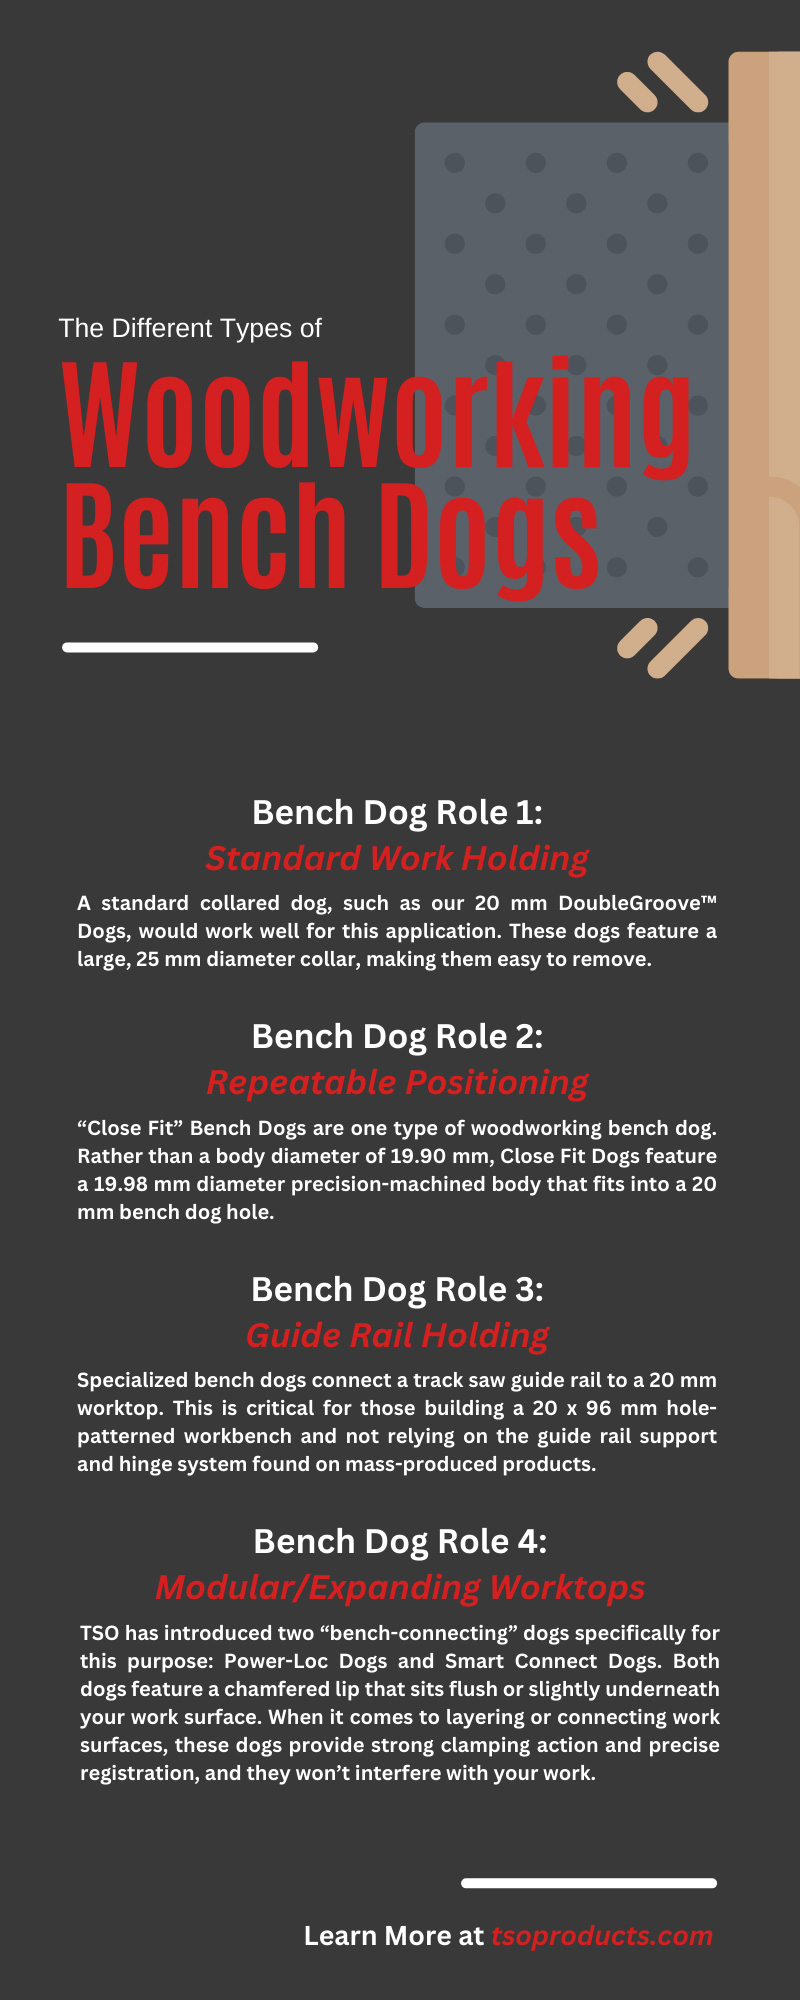 The Different Types of Woodworking Bench Dogs